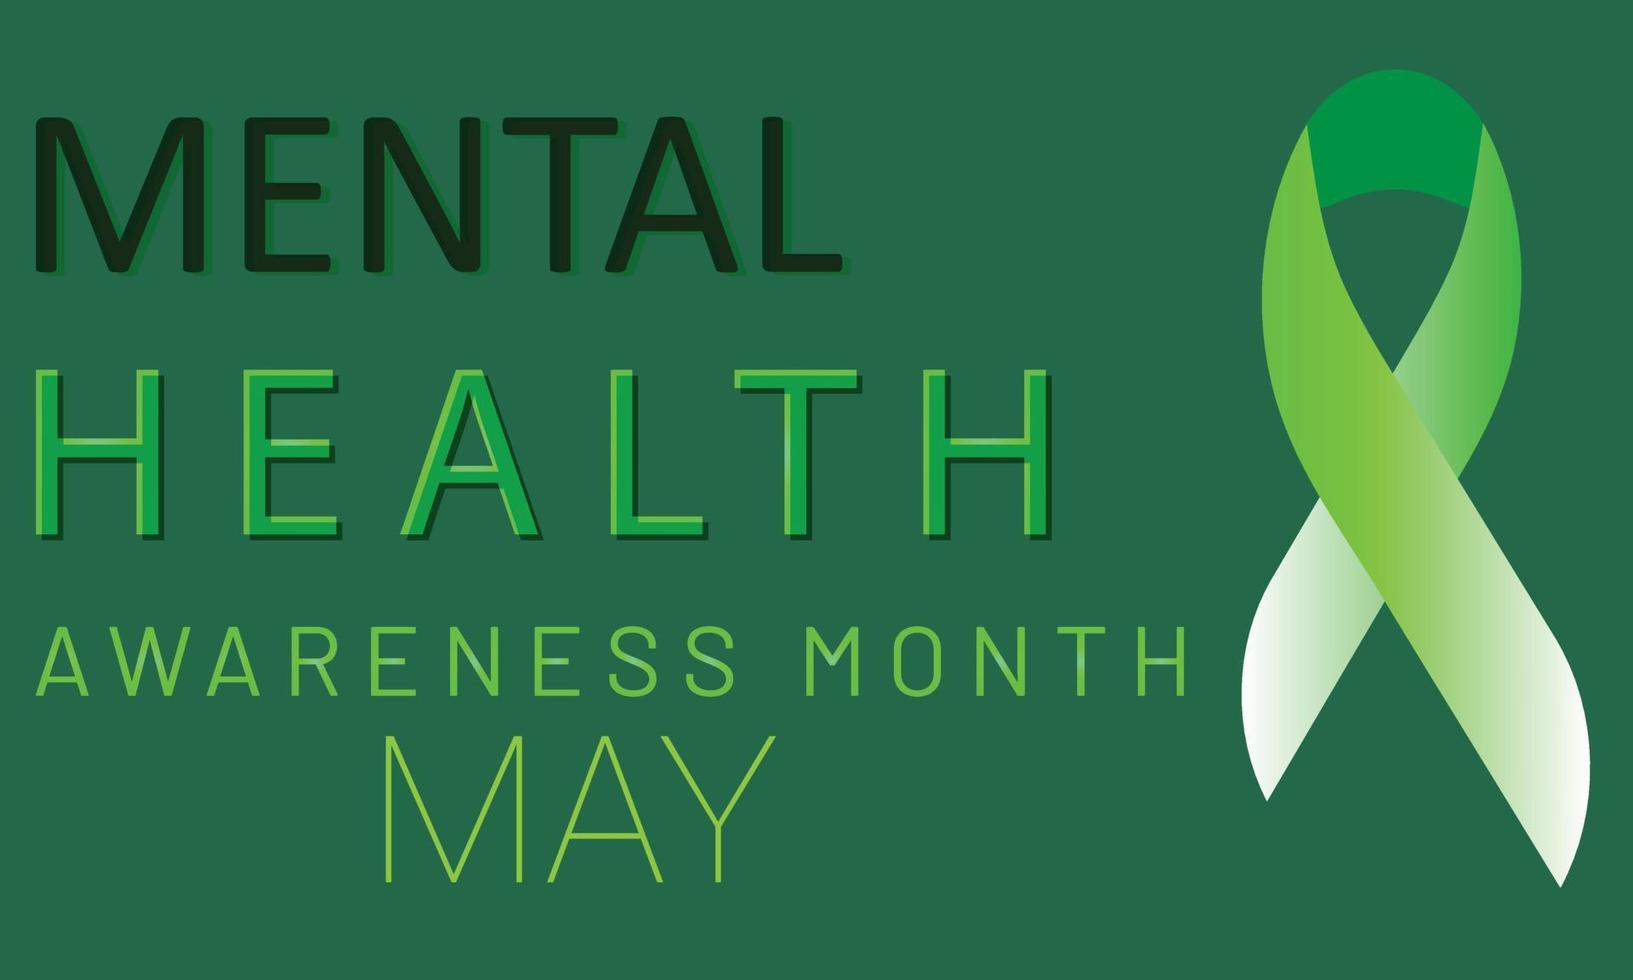 Mental Health Awareness Month May. Template for background, banner, card, poster vector